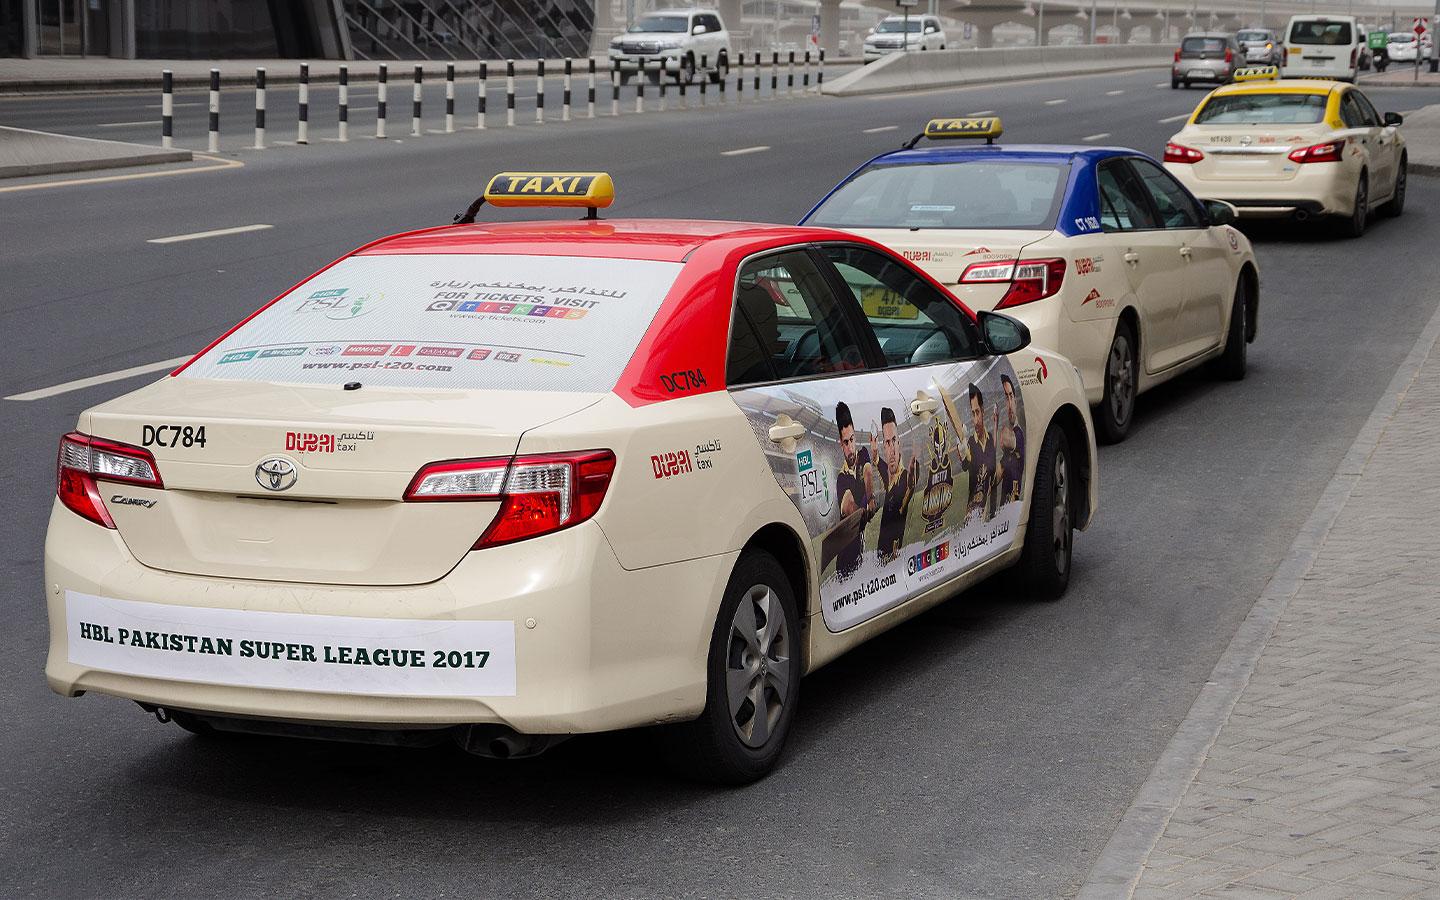 you must have all the Documents for RTA Permission to Advertise on Taxi Vehicles